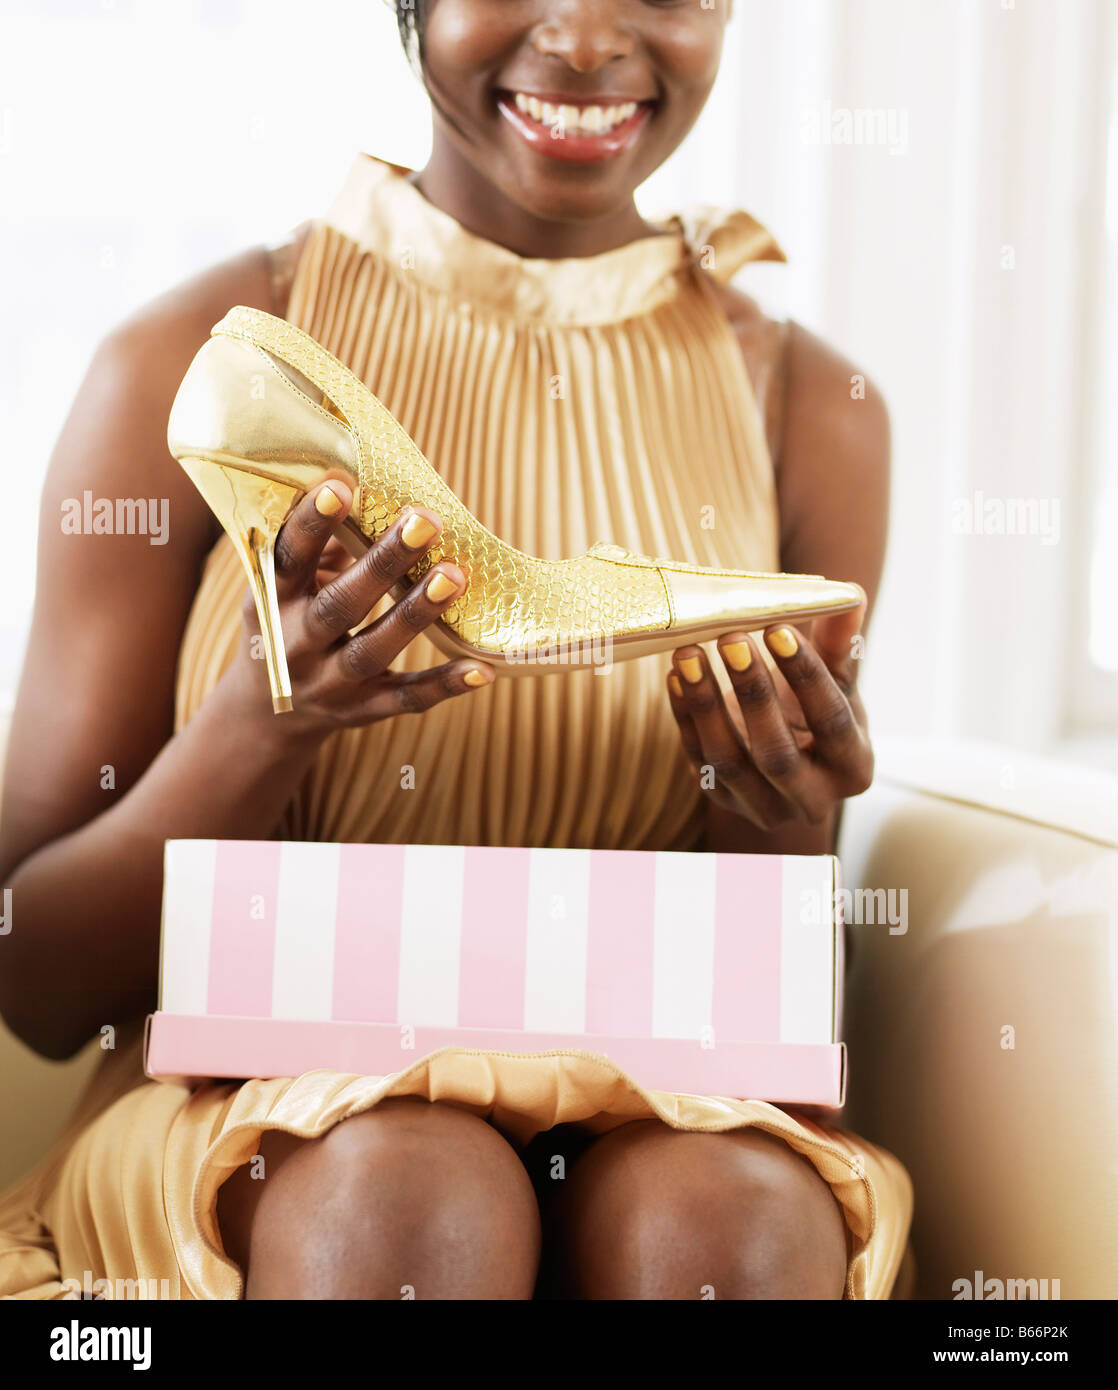 Young Woman Taking High-Heeled Shoe from Shoebox Stock Photo